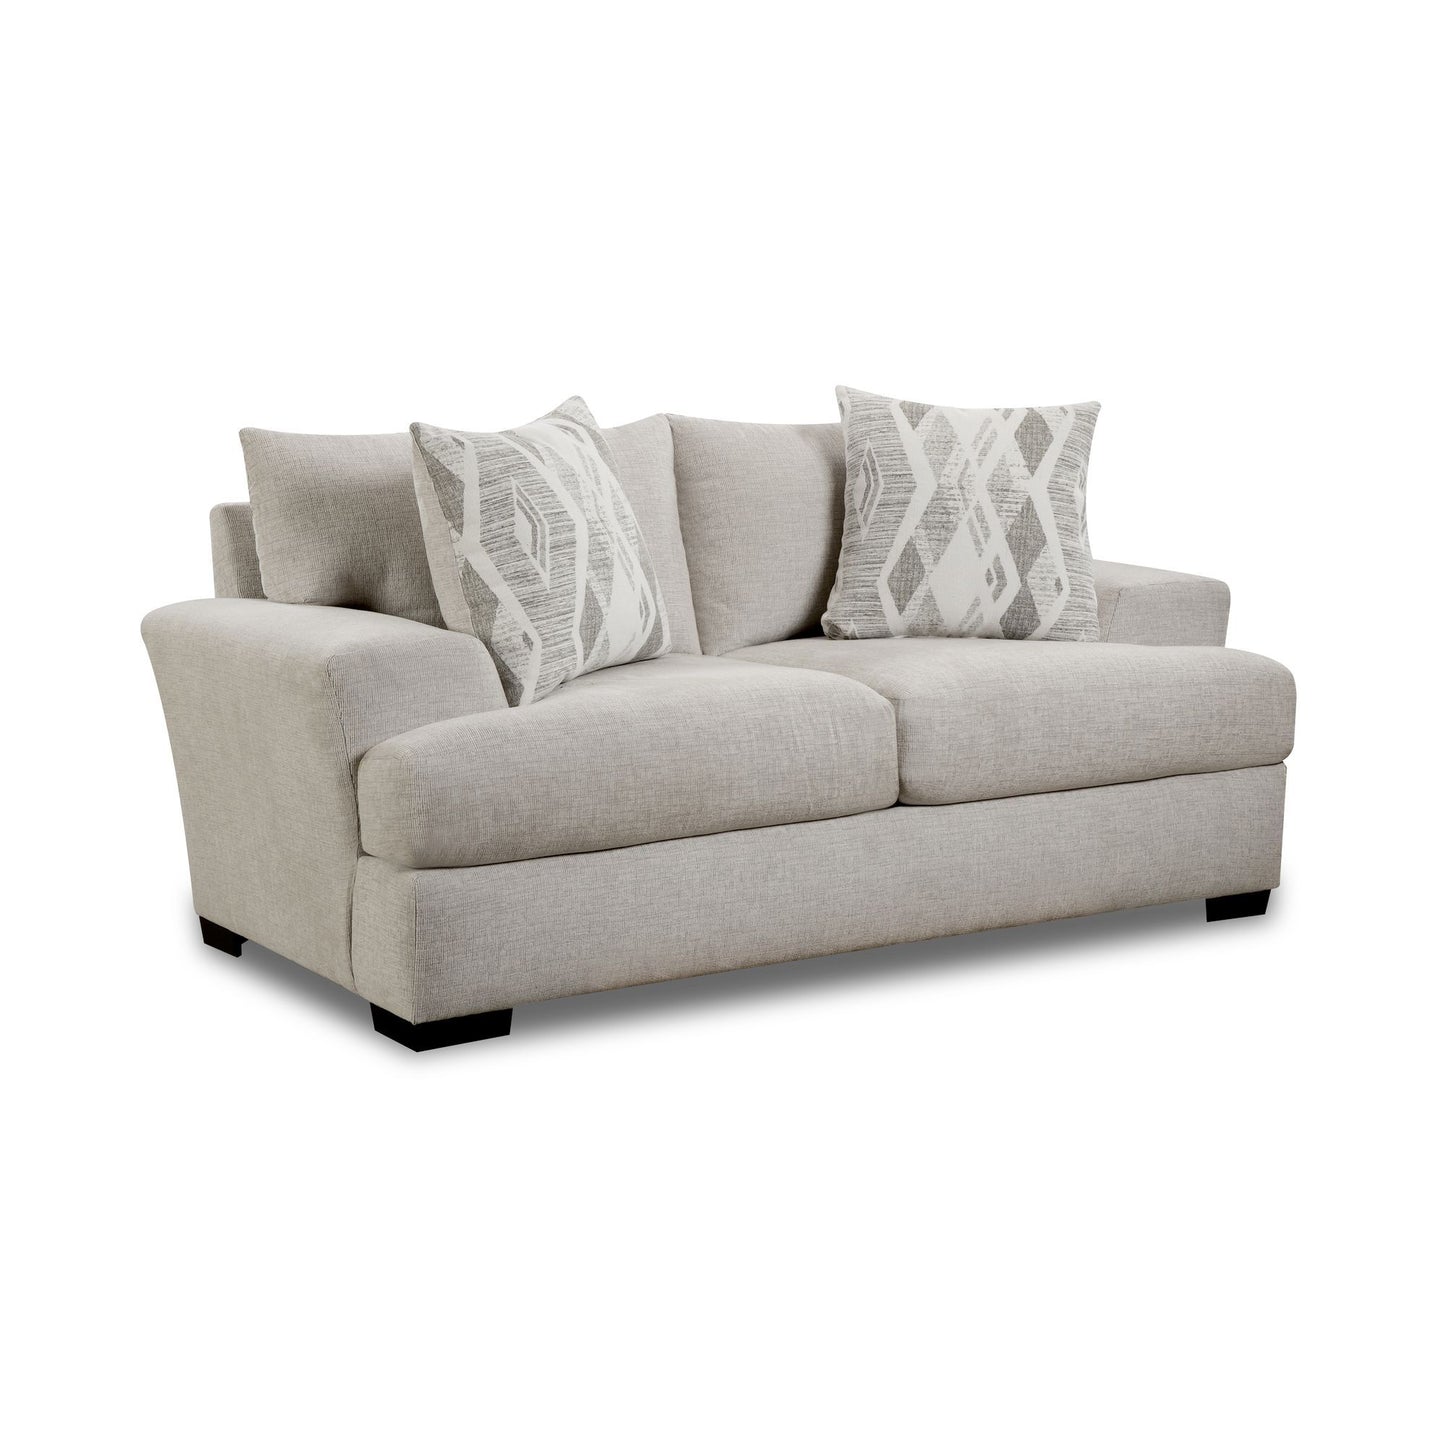 Style Line 9010 - Loveseat - Fentasy Silver With 2 Pillows Exotica Birch